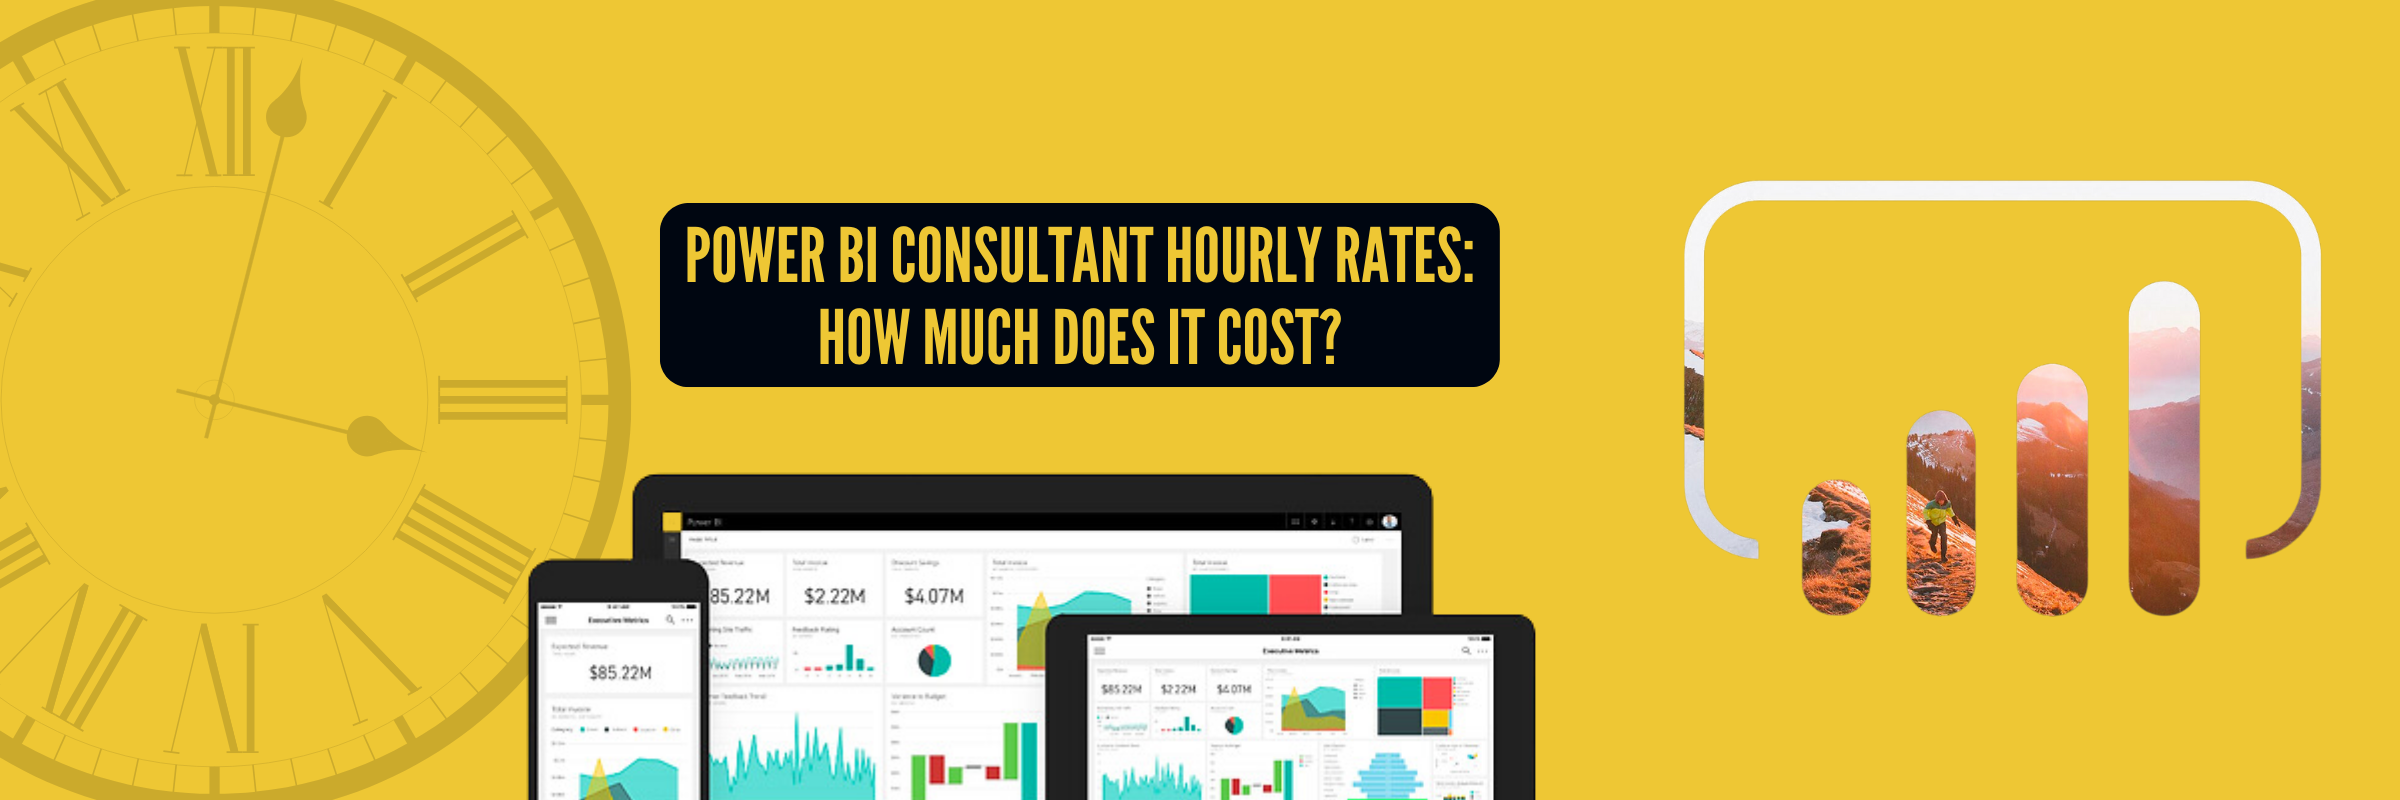 Power BI Consultant Hourly Rates: How Much Does It Cost?